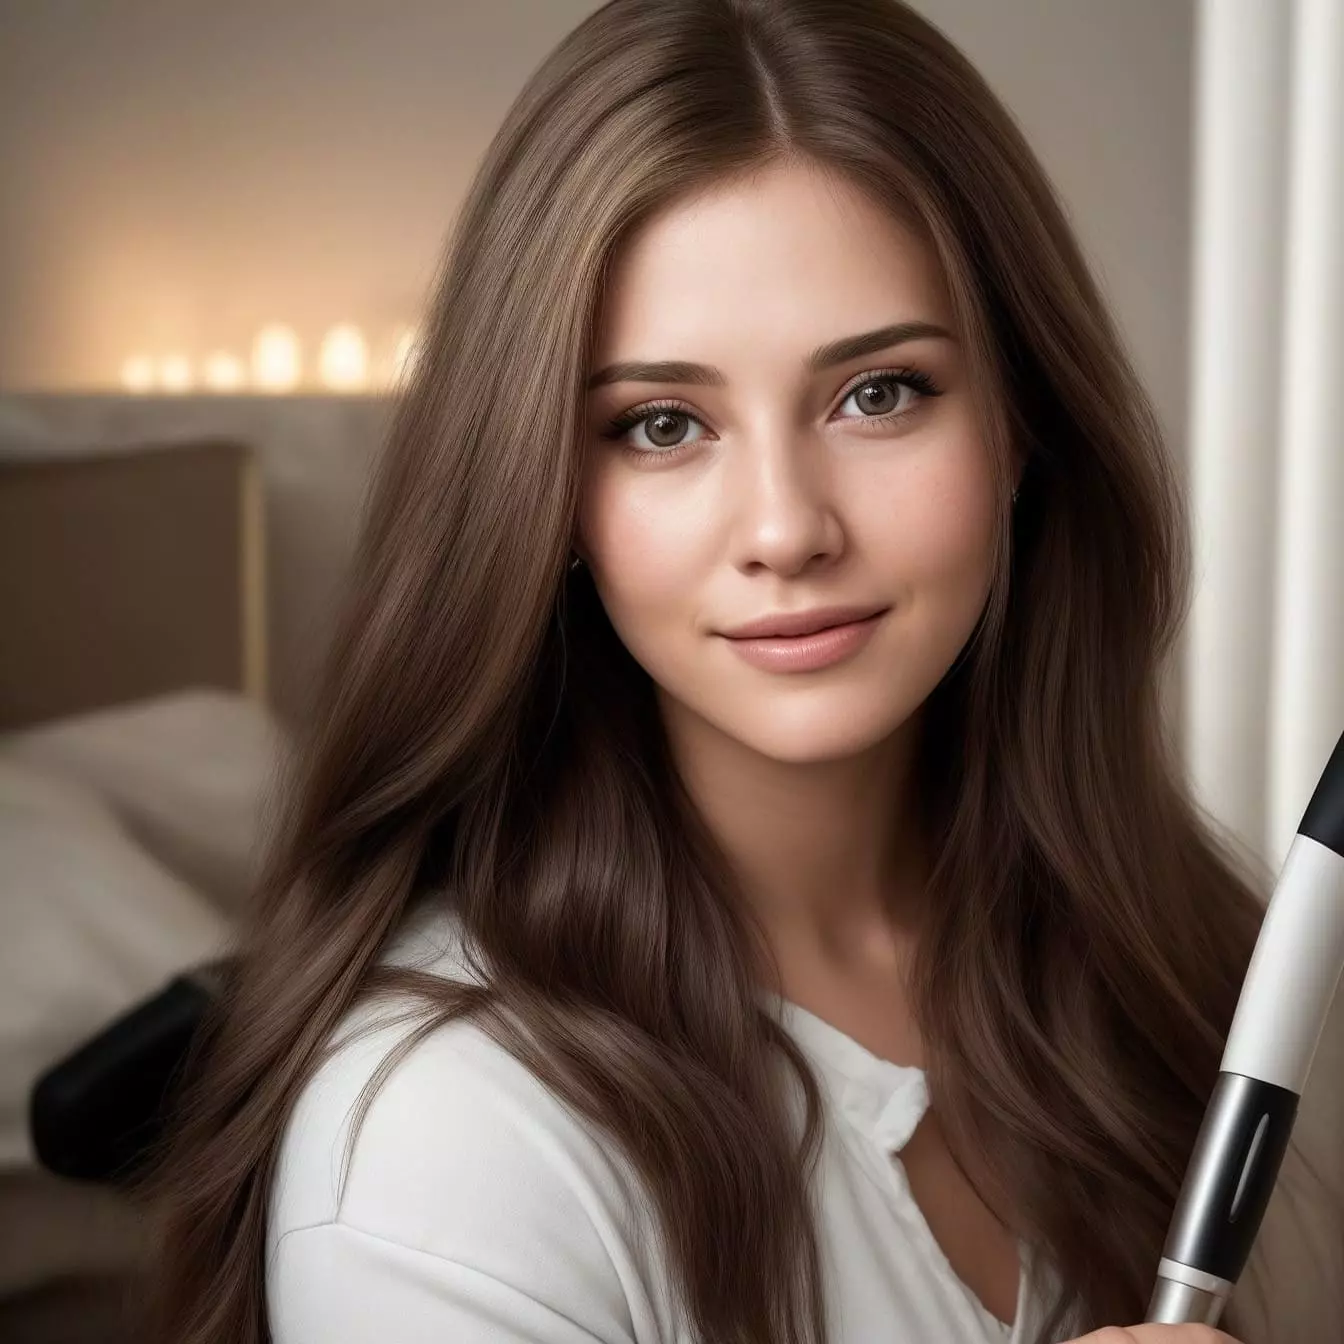 Woman with a hair straightener in her hands